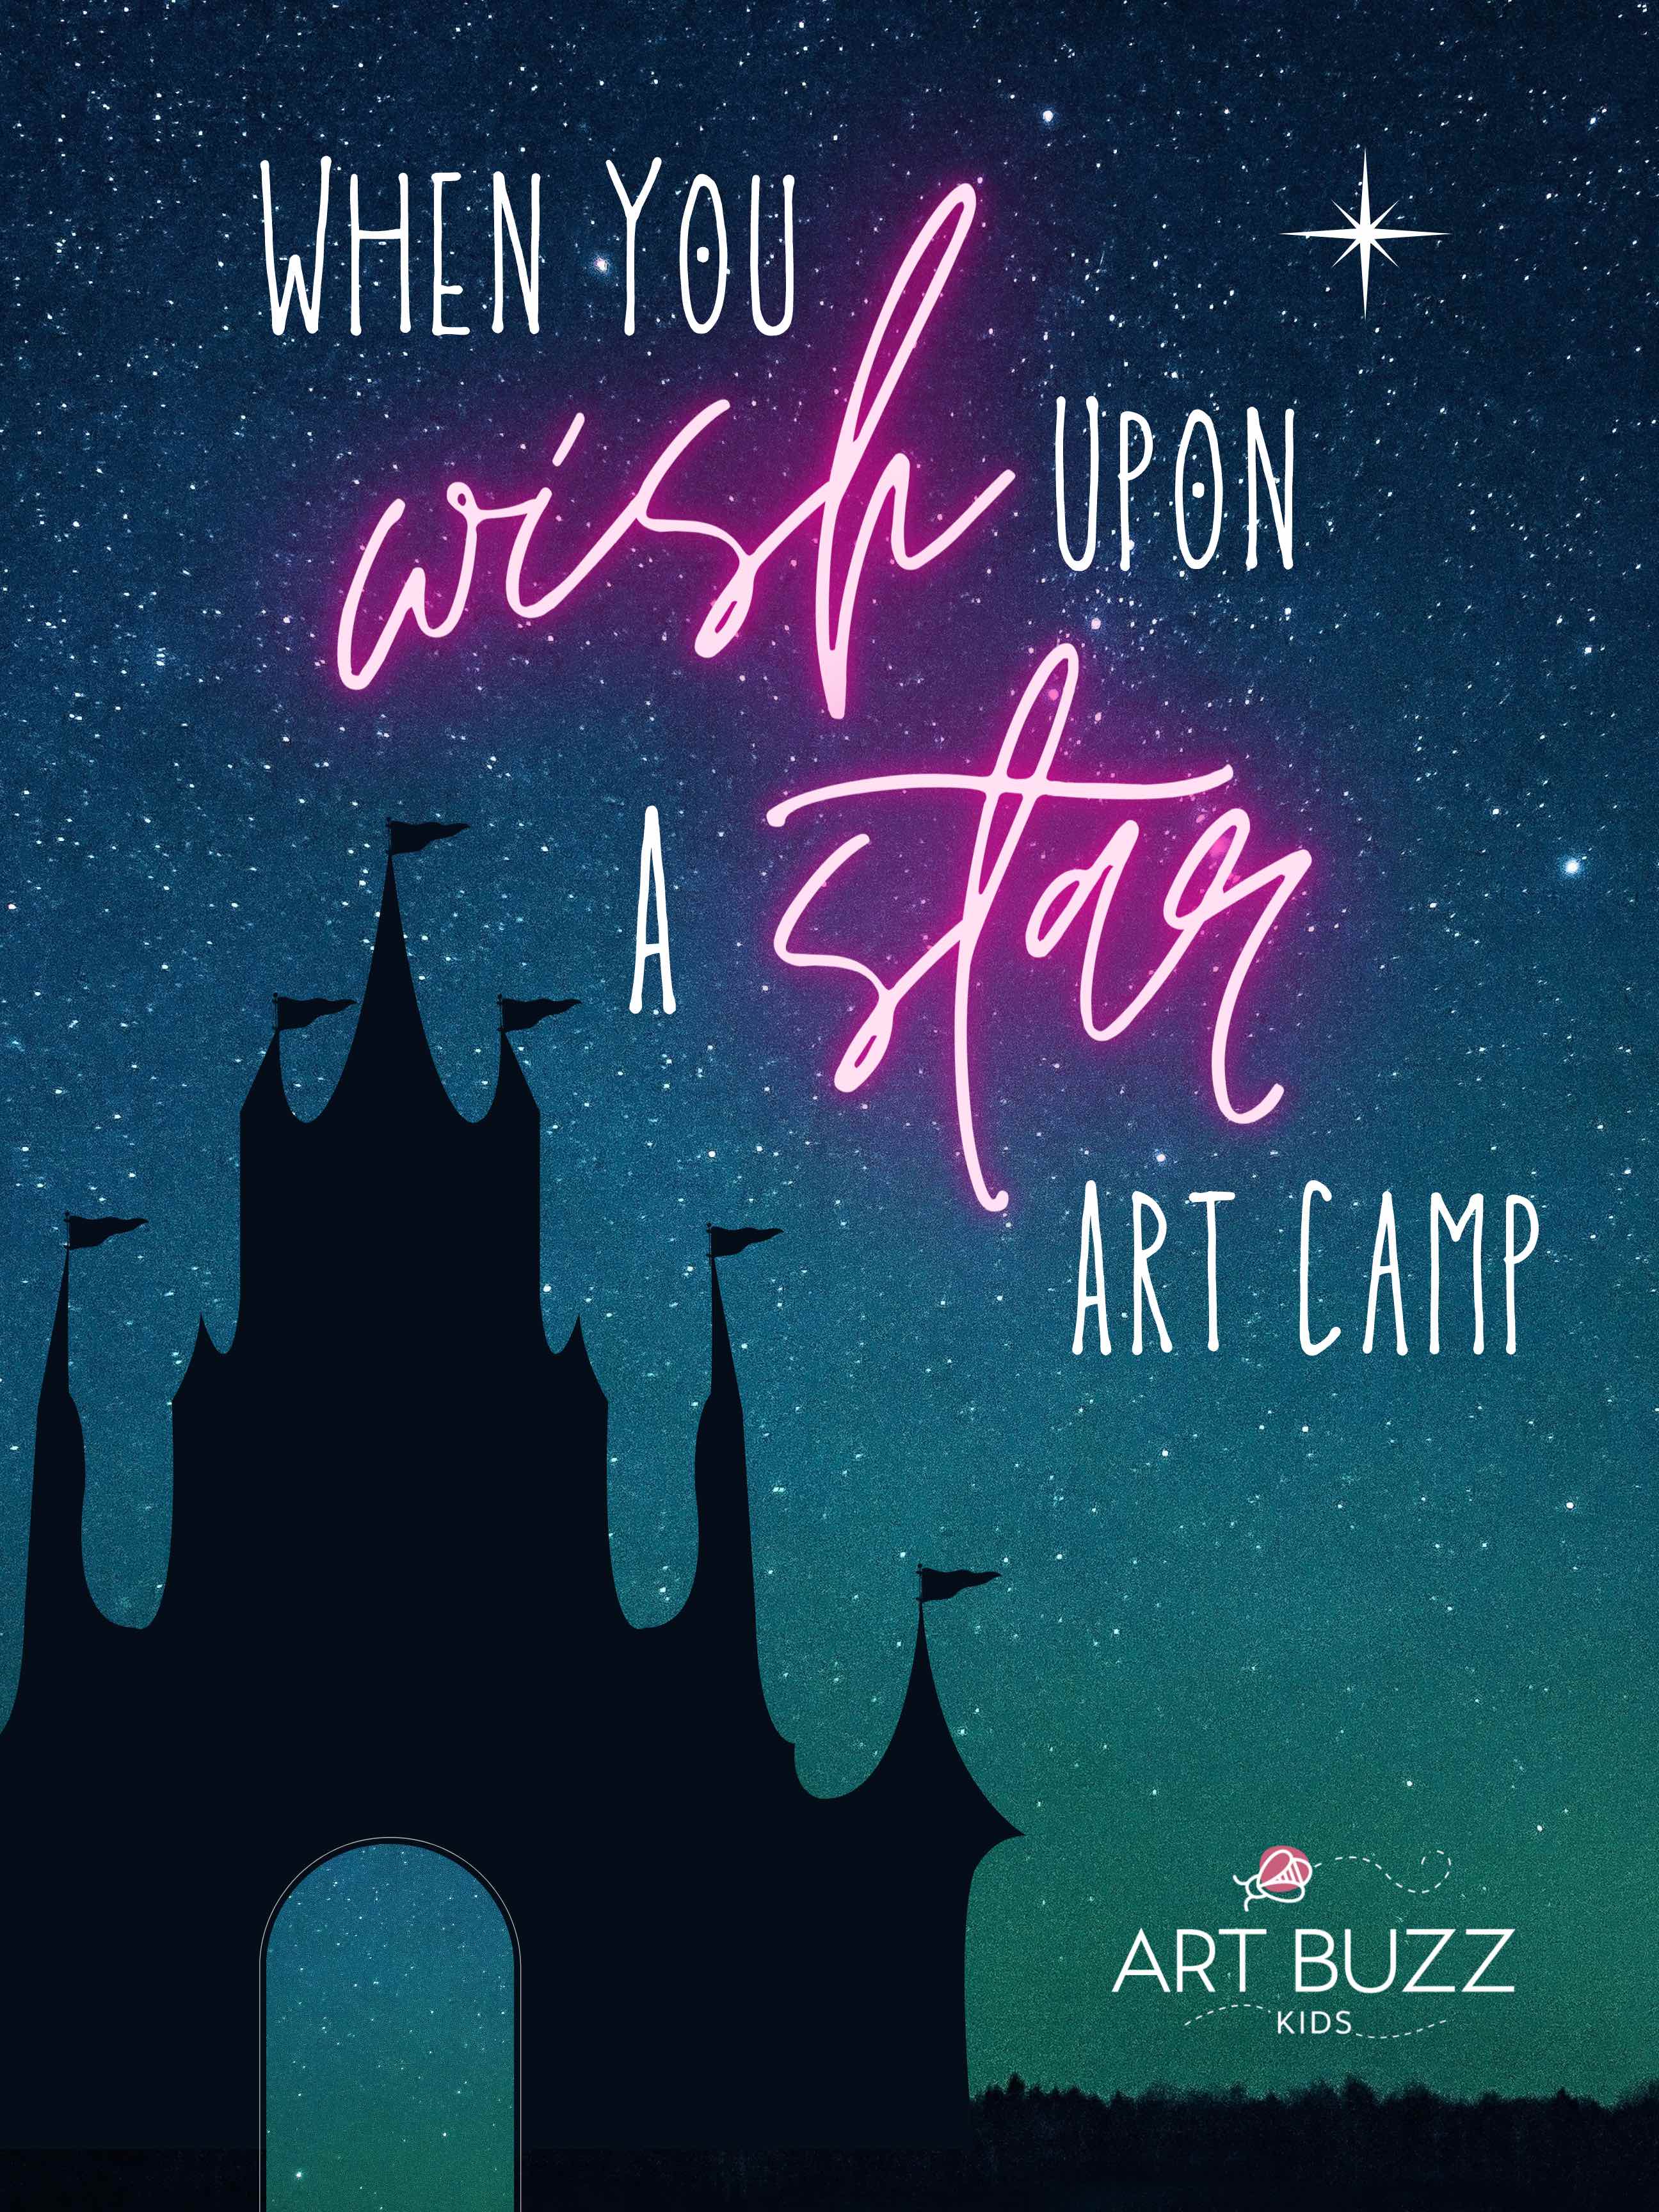 When You Wish Upon a Star Camp